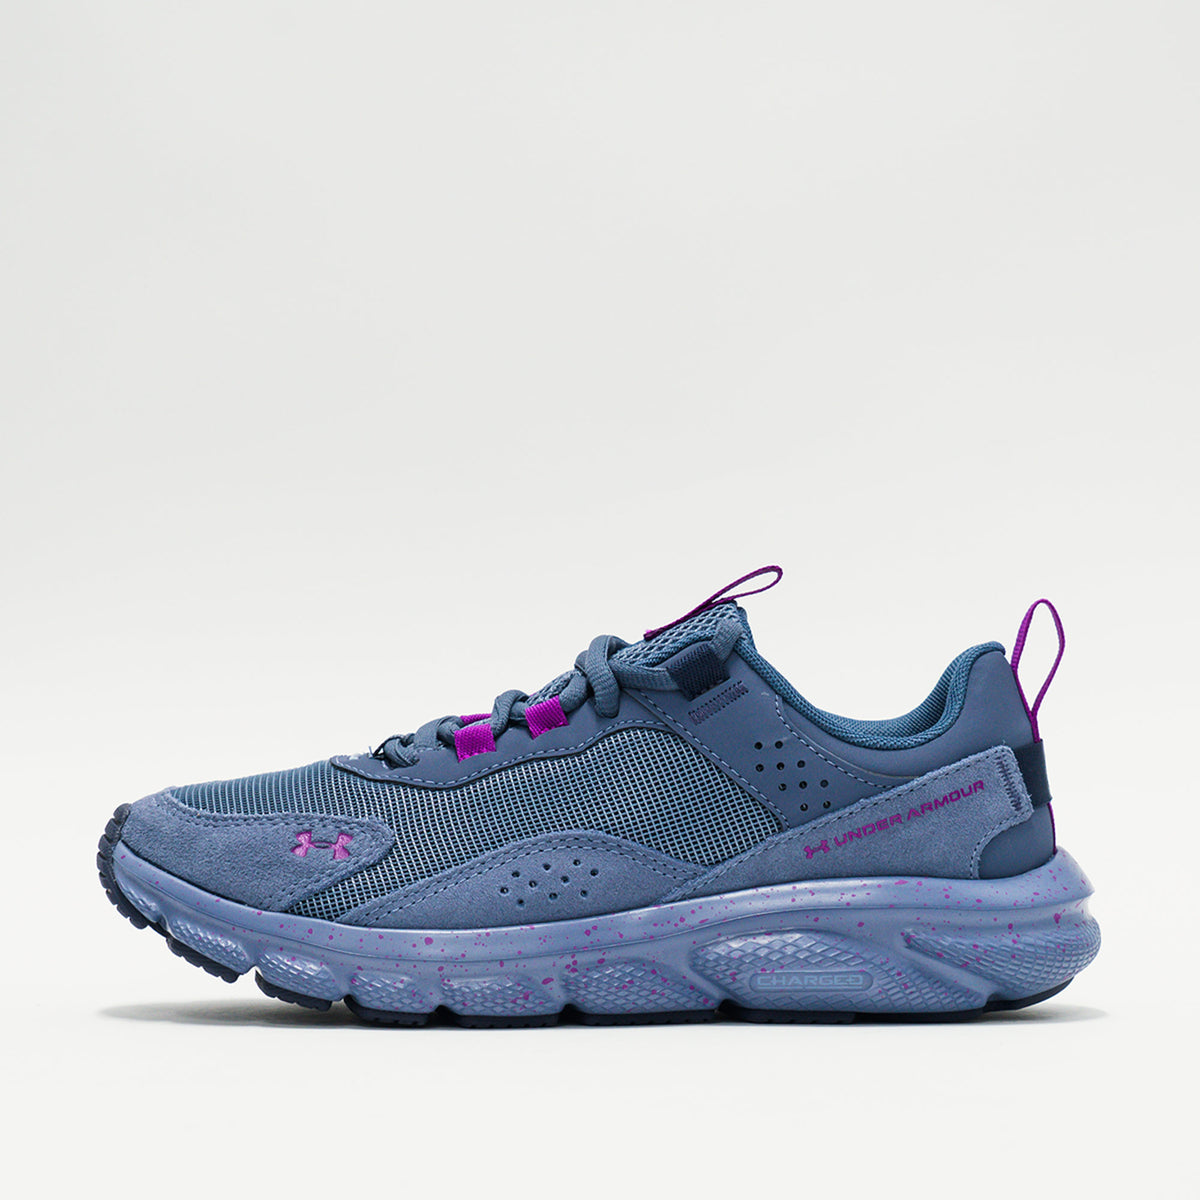 Under Armour Charged Verssert Speckle (W)